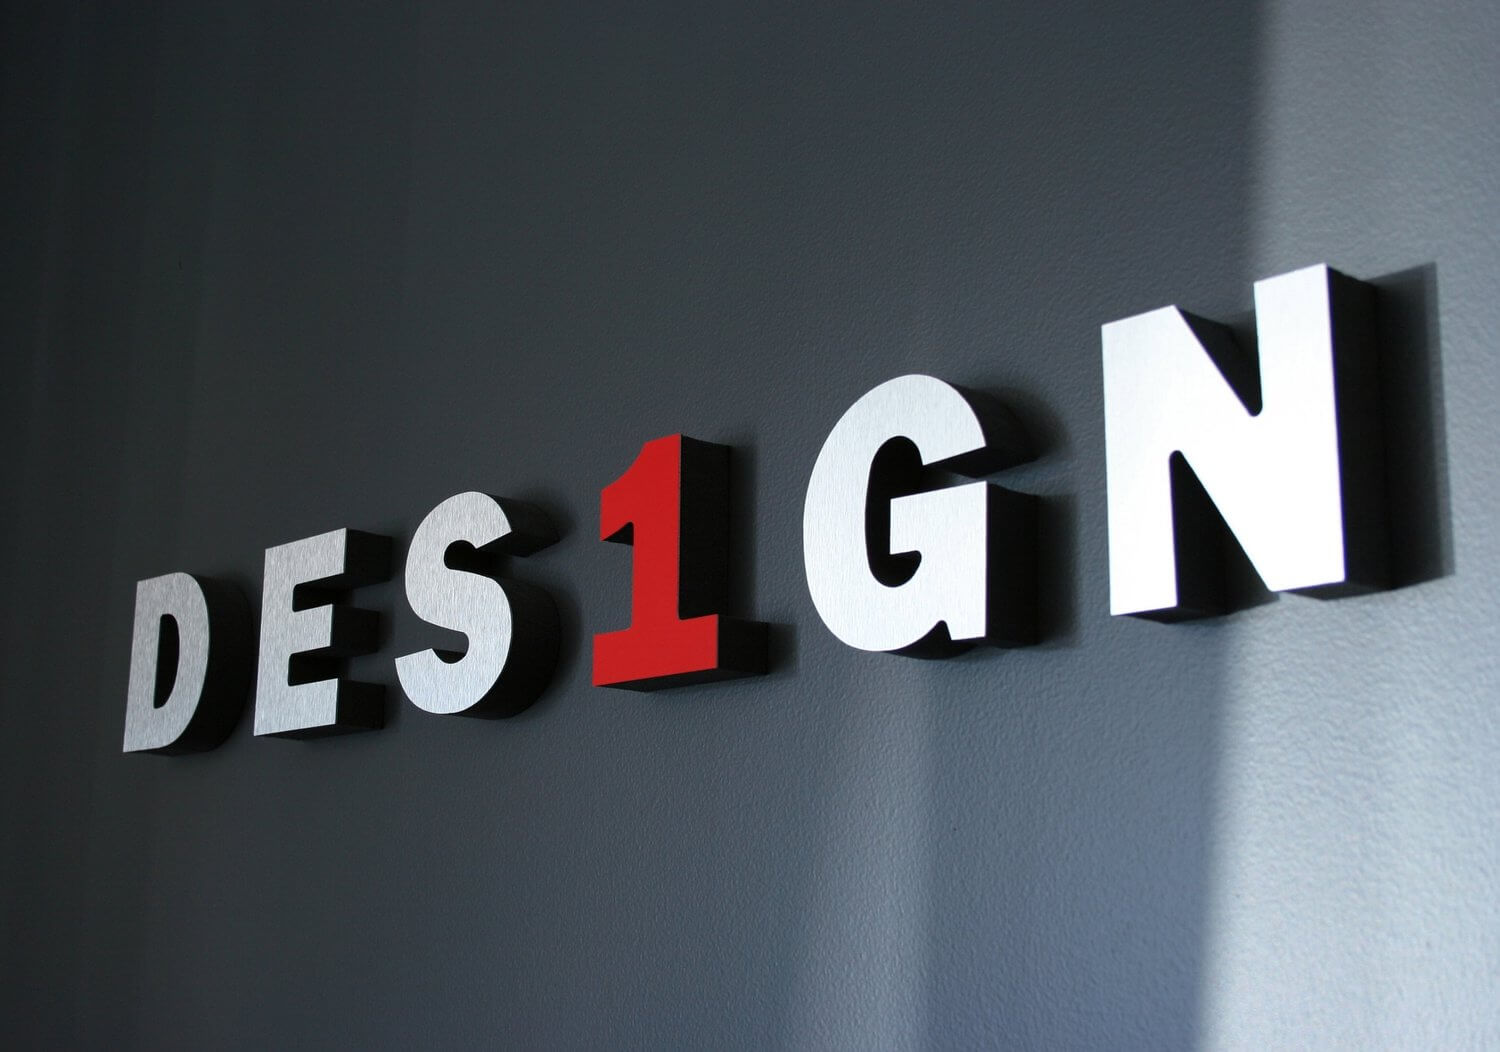 Design One signboard on the wall